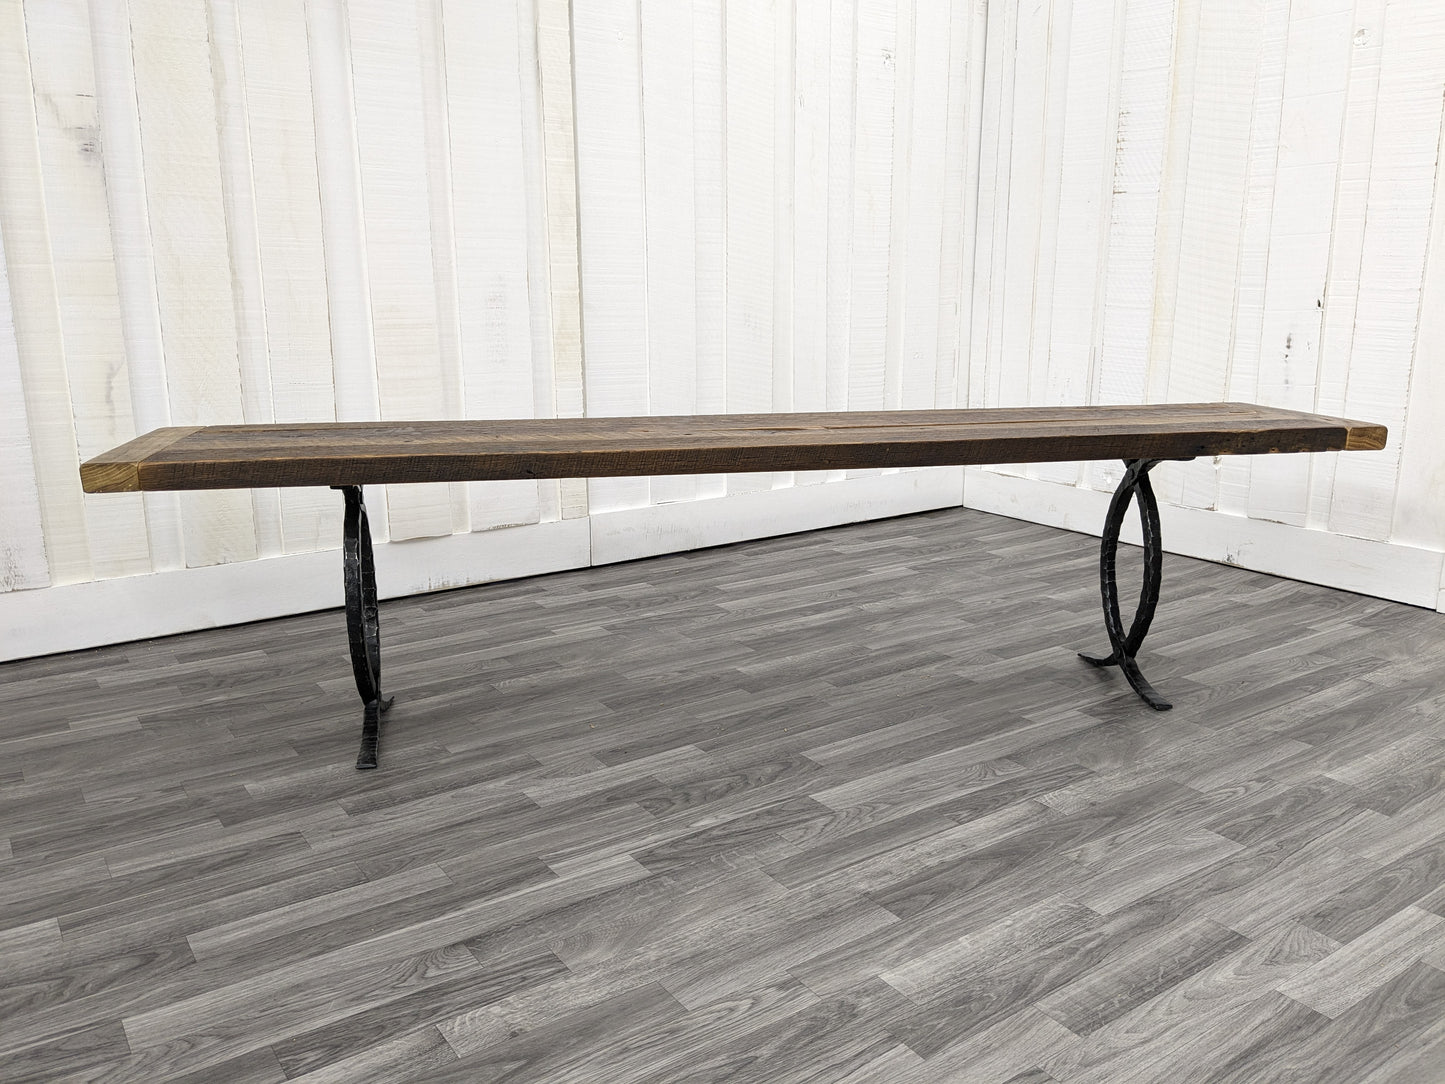 16" x 80" Reclaimed Barnwood Bench Seat / Console Table Top